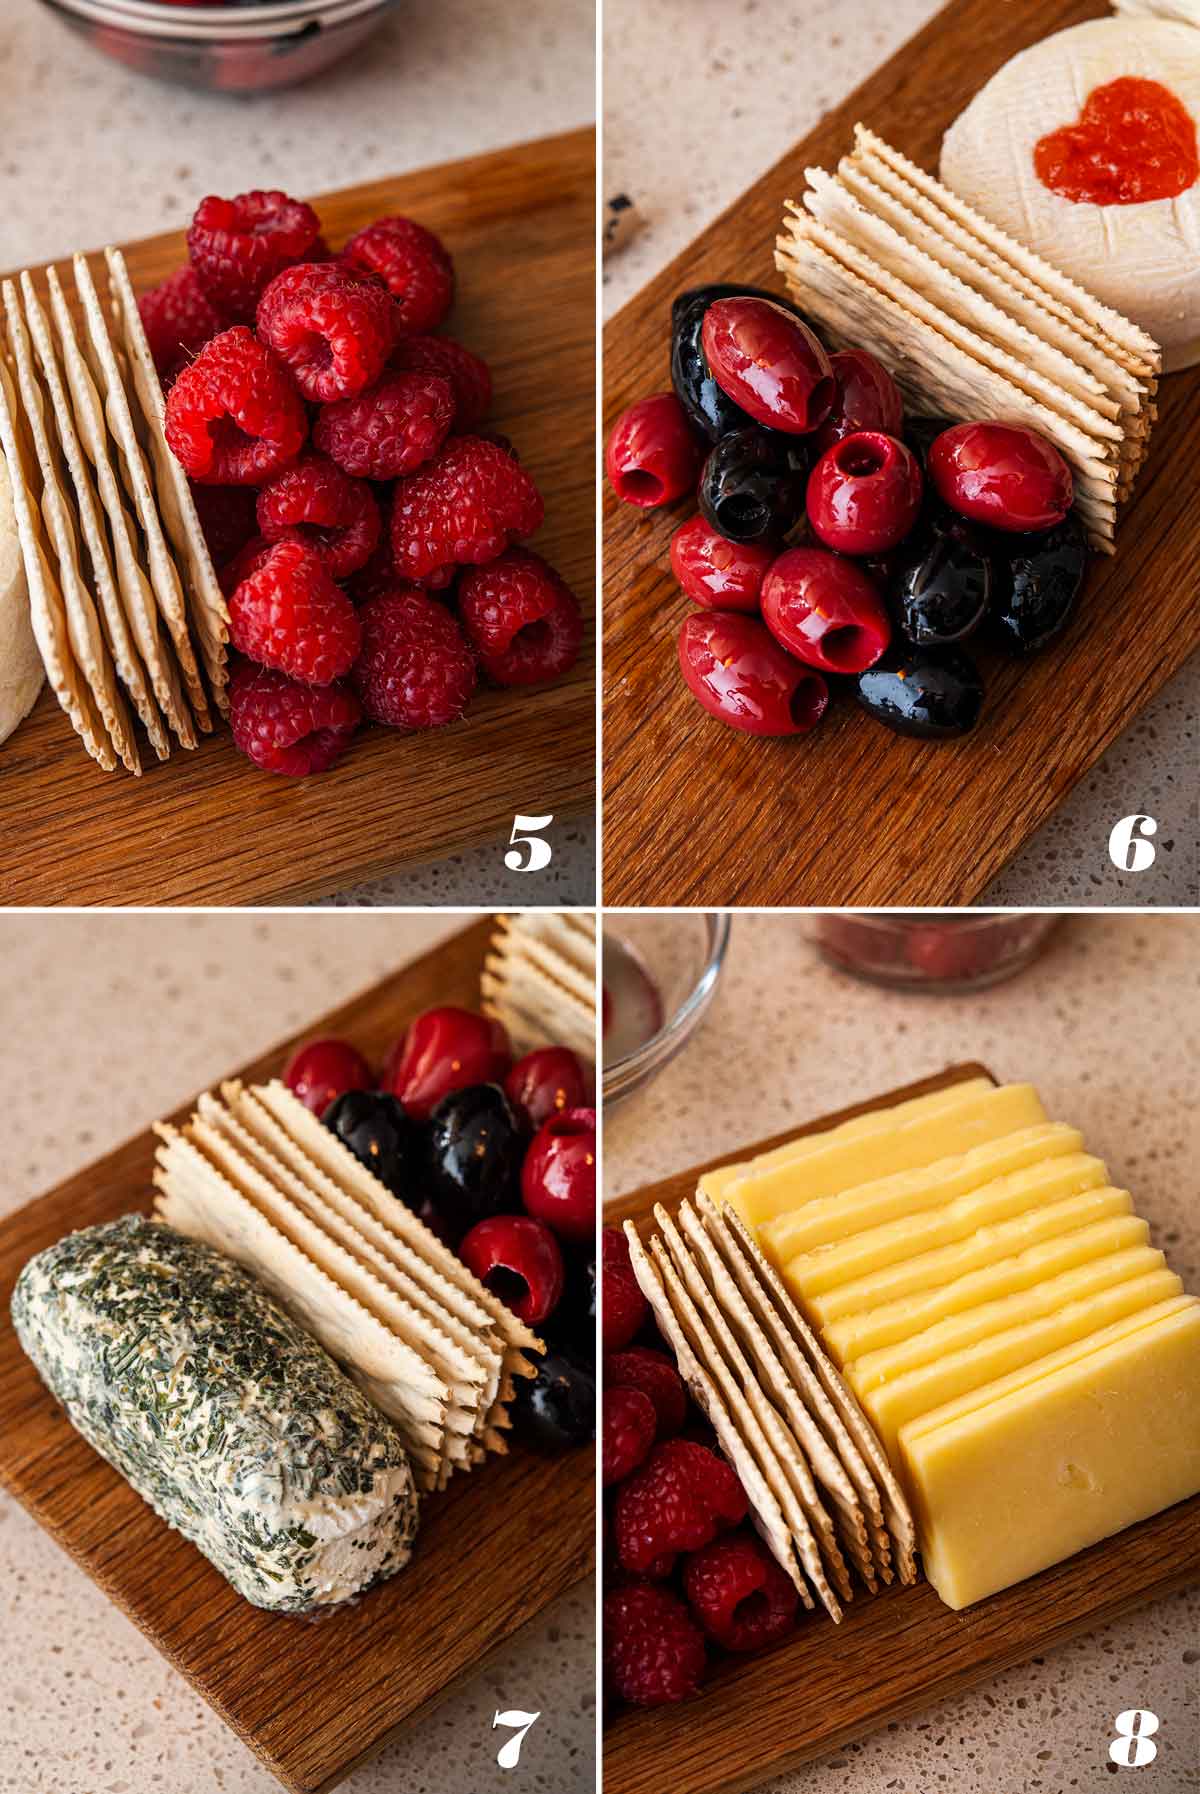 A collage of 4 numbered images showing how to assemble a cheese board.